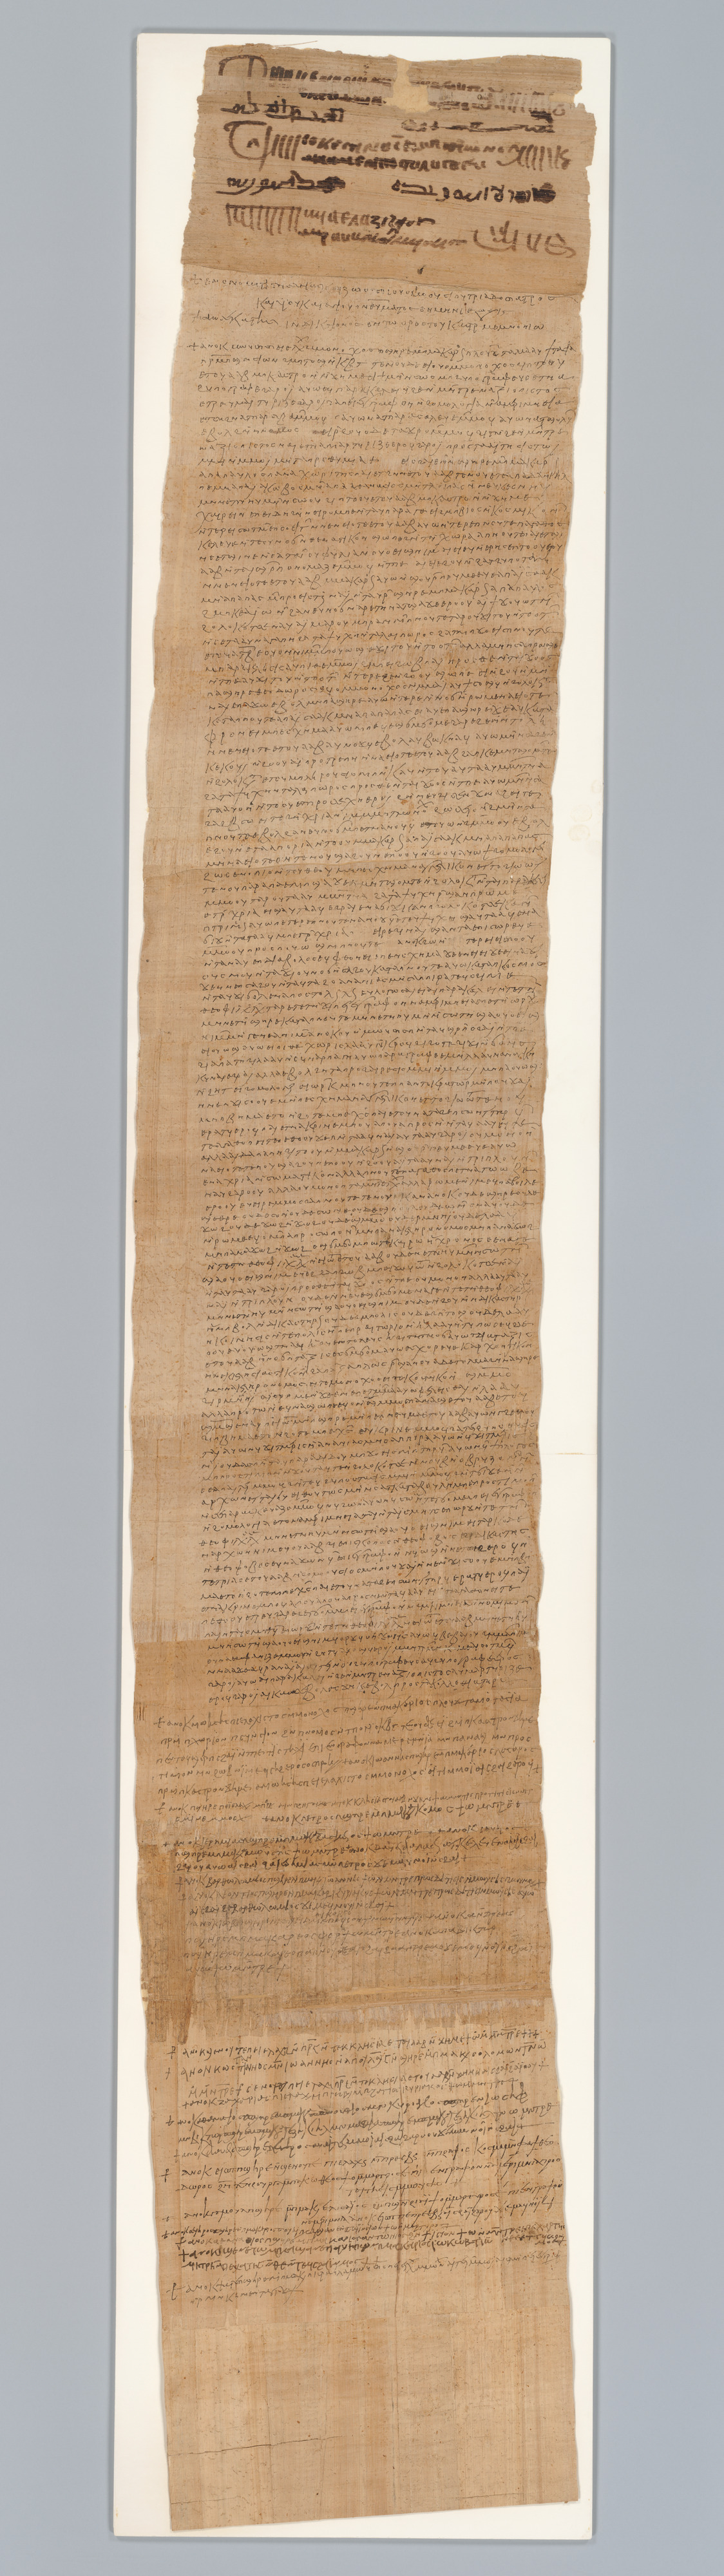 A long photograph of ancient papyrus scroll